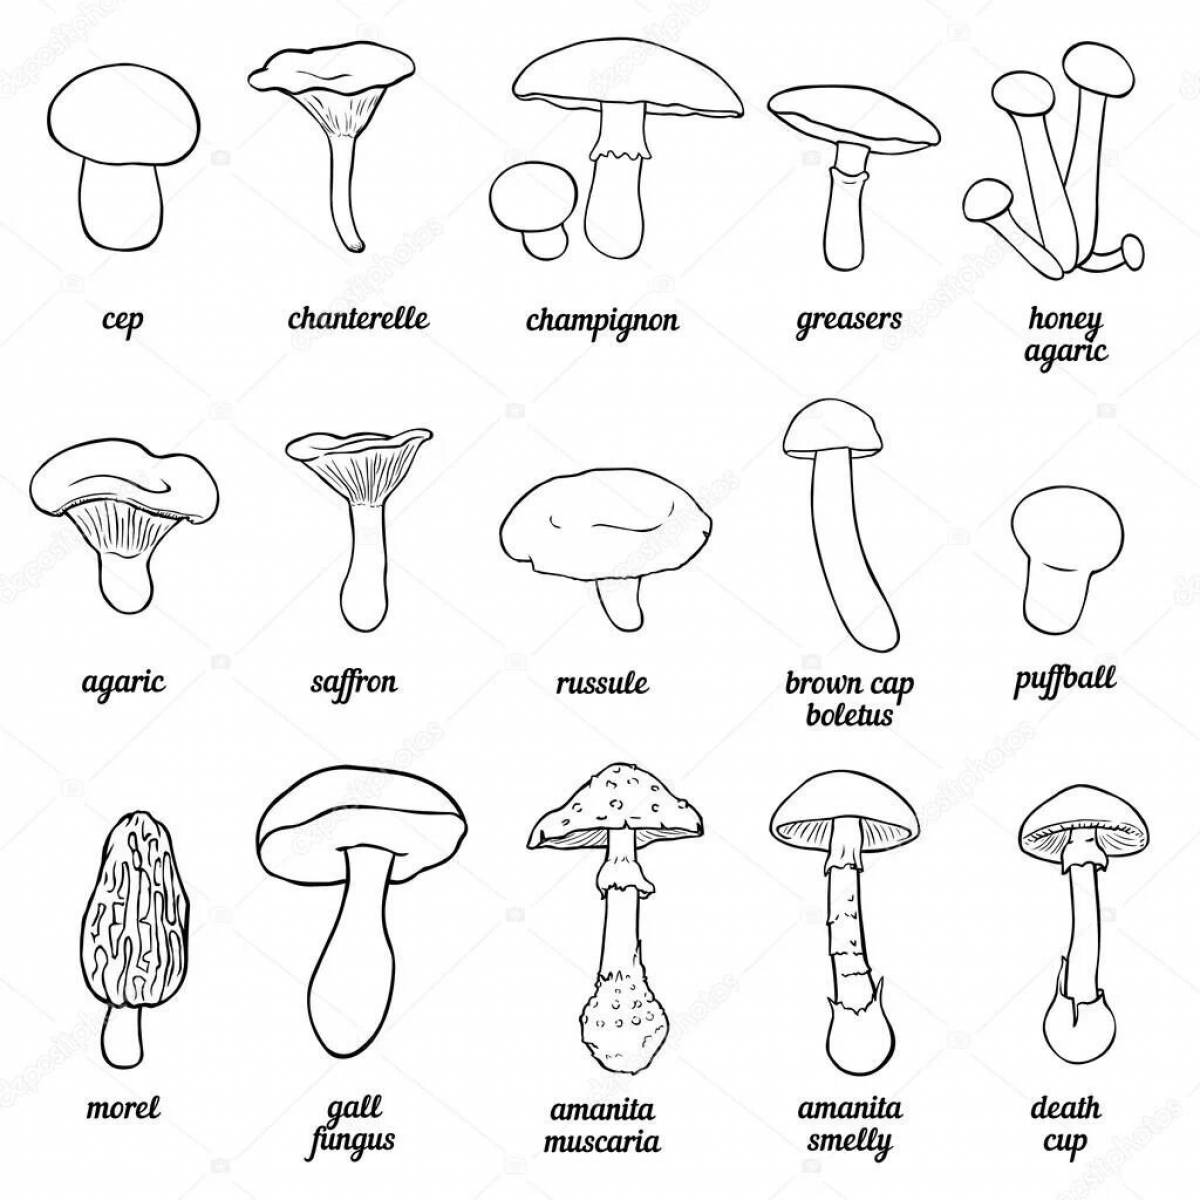 Coloring page hypnotic inedible mushrooms